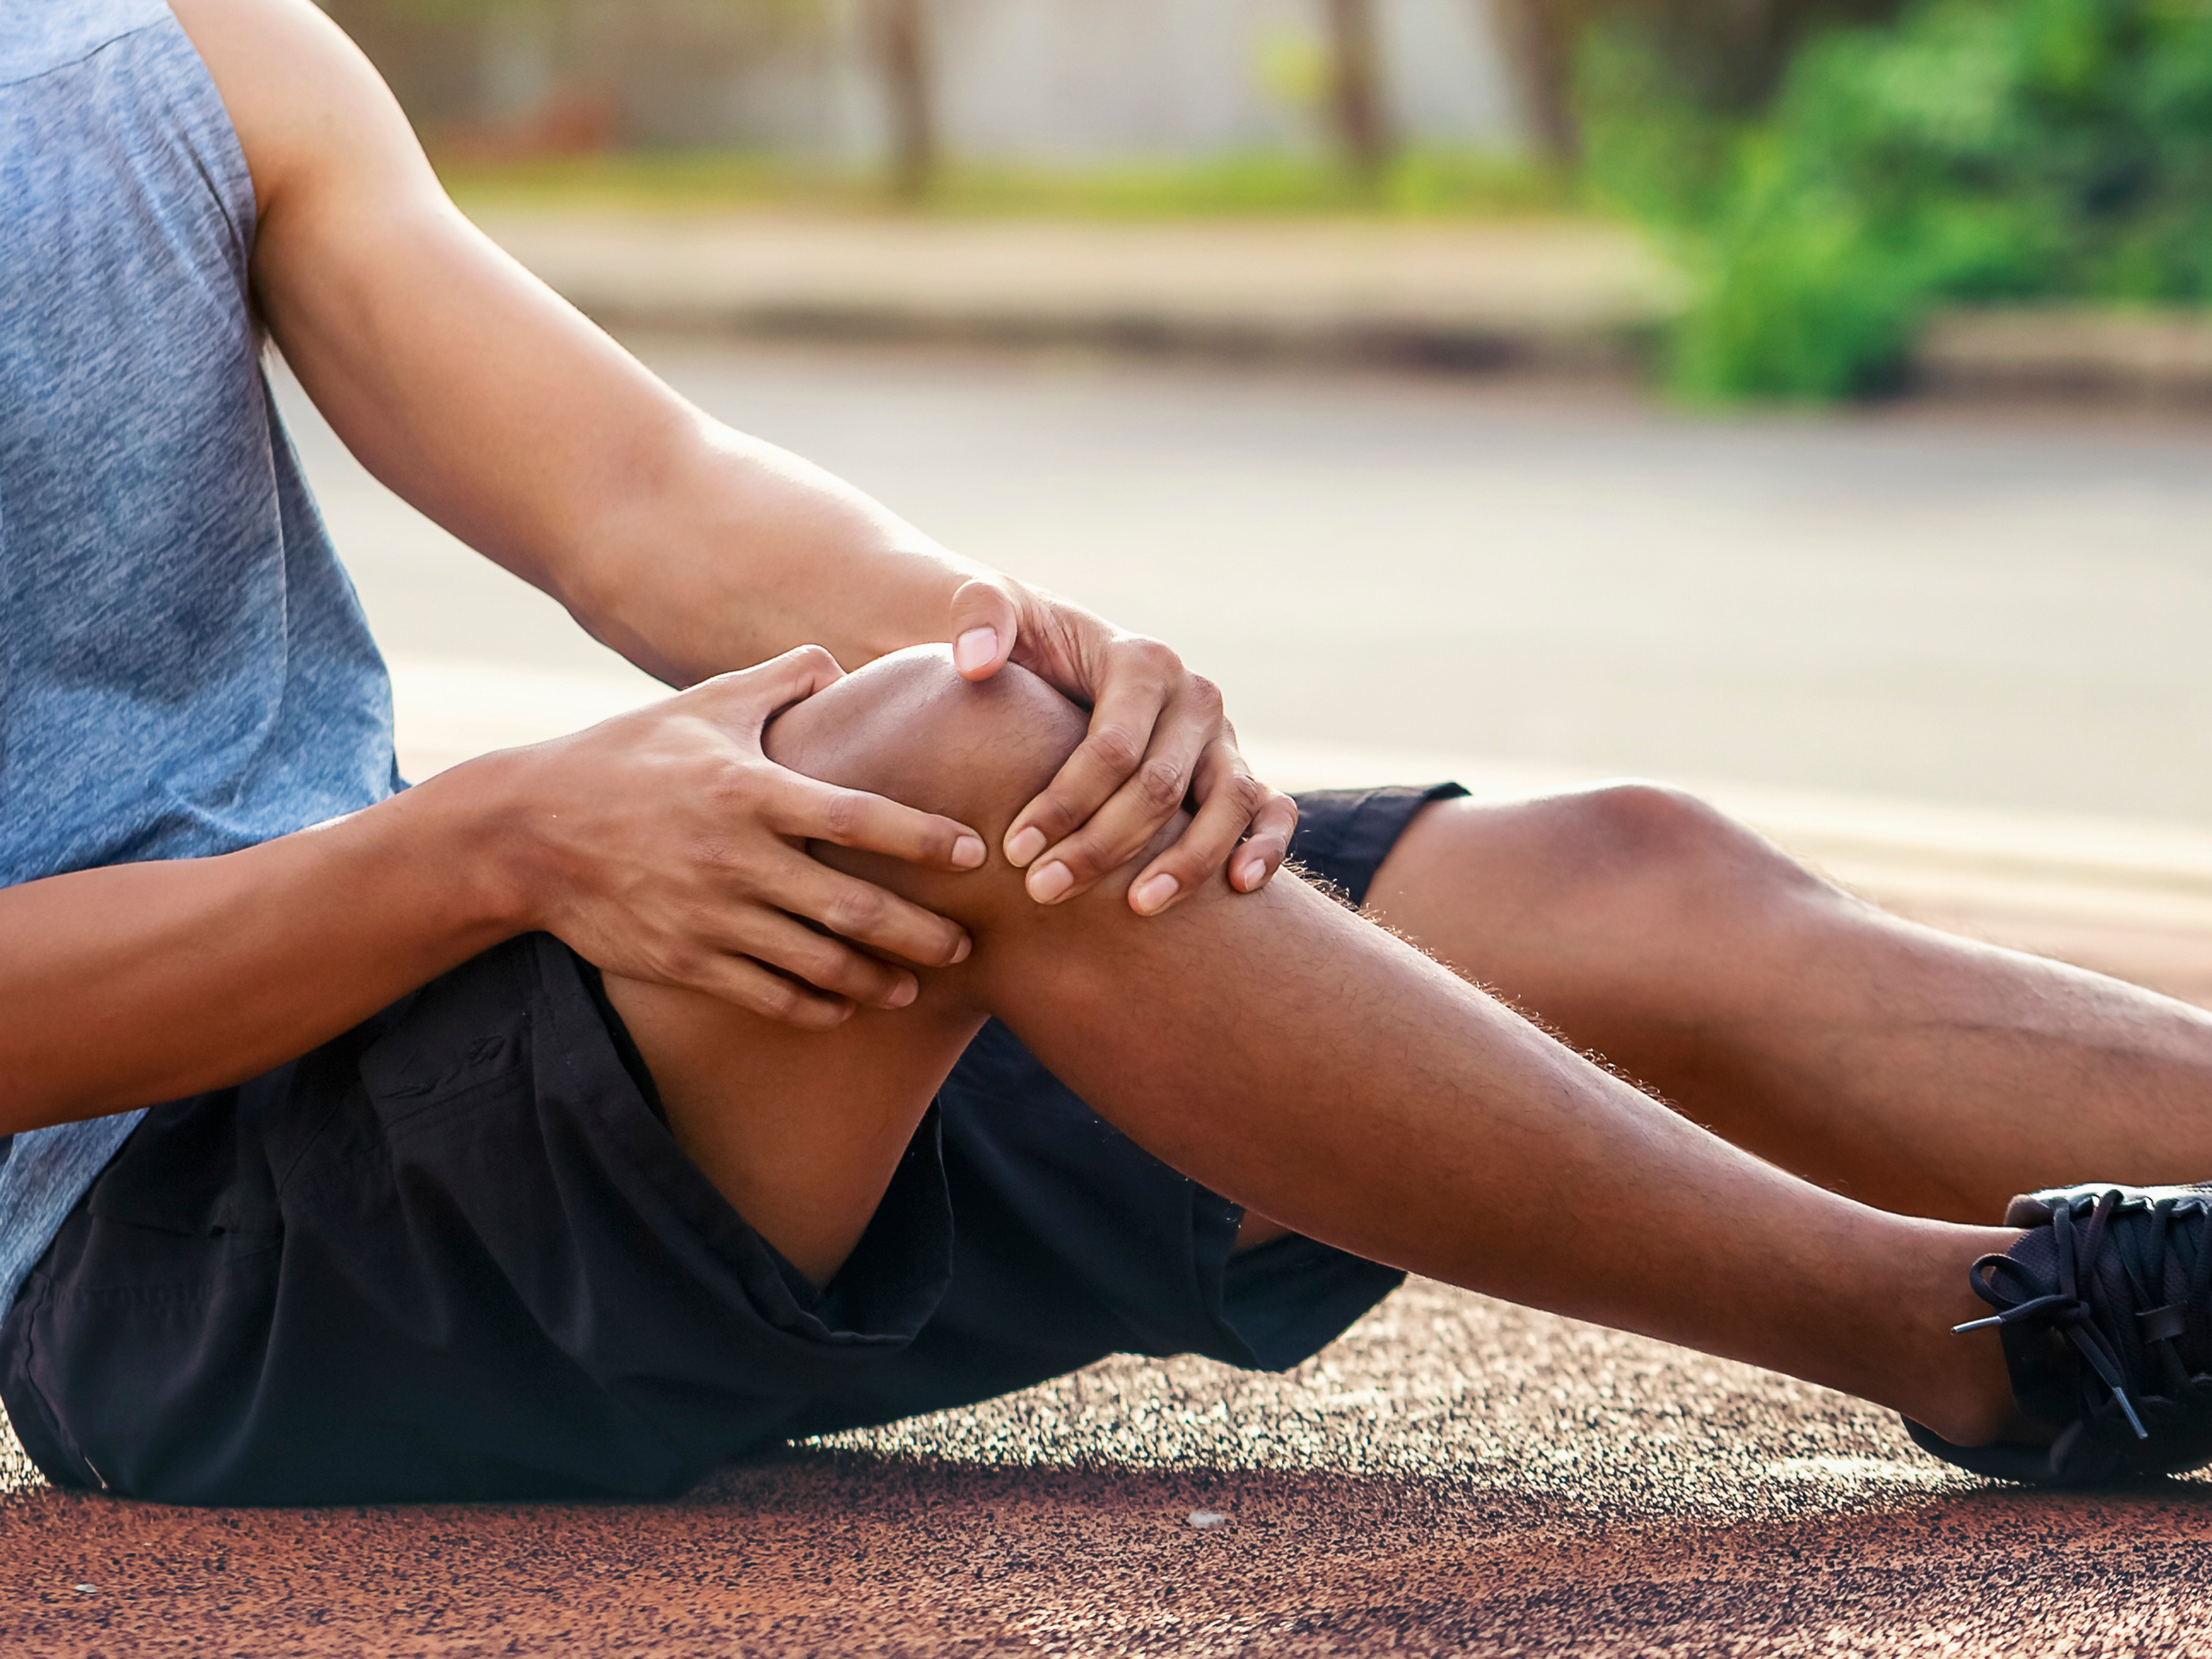 Man uses pain as a guide for patellar tendonitis rehab.